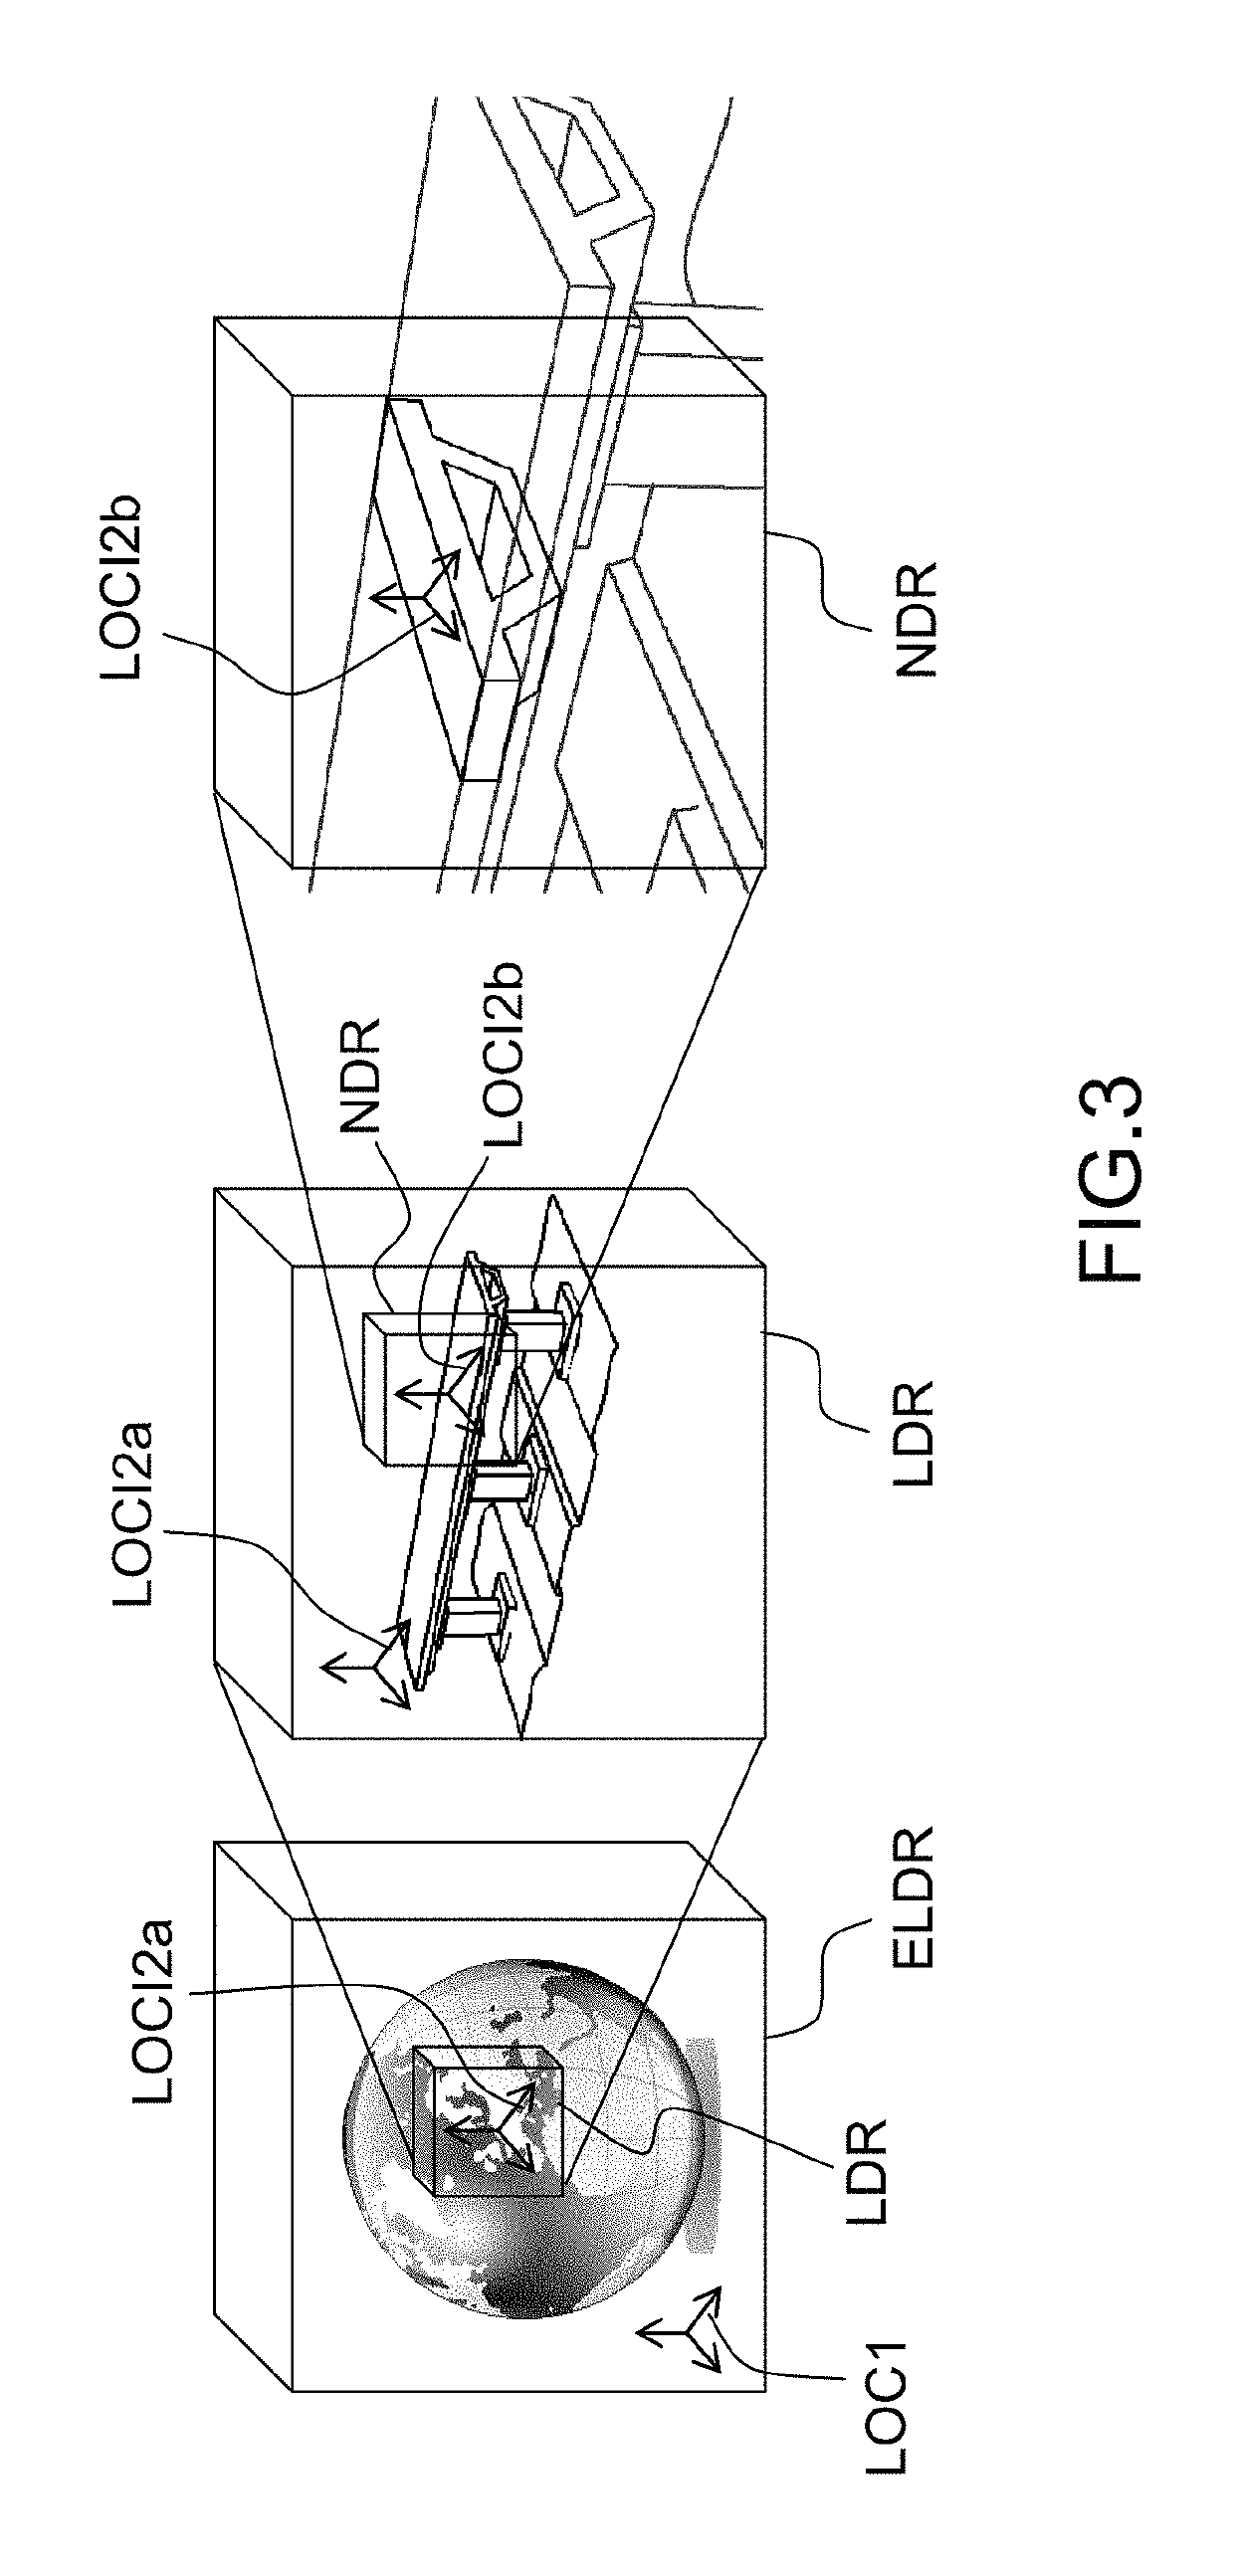 Computer-implemented method for designing an assembly of objects in a three-dimensional scene of a system of computer-aided design